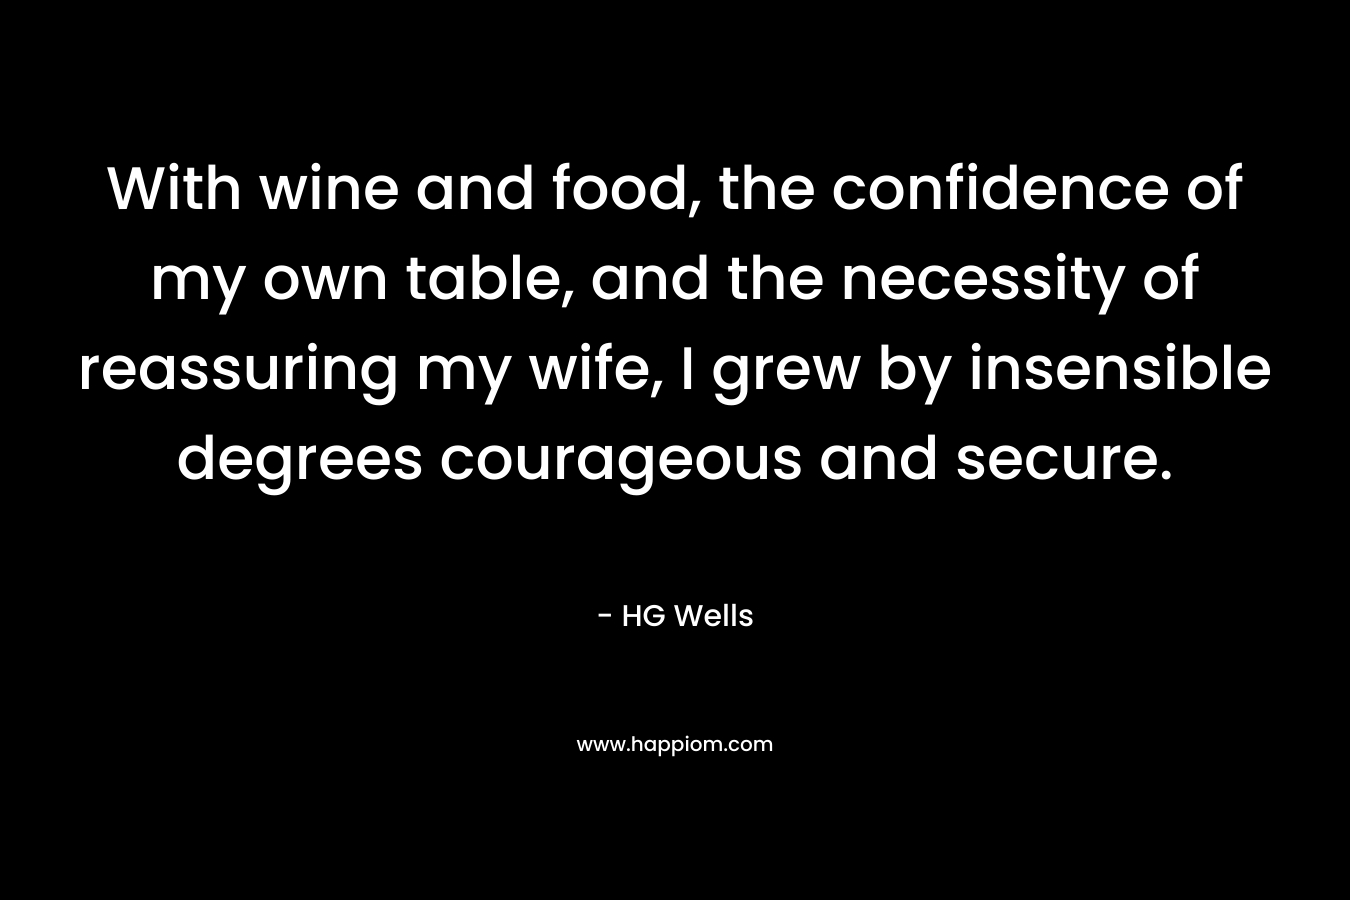 With wine and food, the confidence of my own table, and the necessity of reassuring my wife, I grew by insensible degrees courageous and secure.